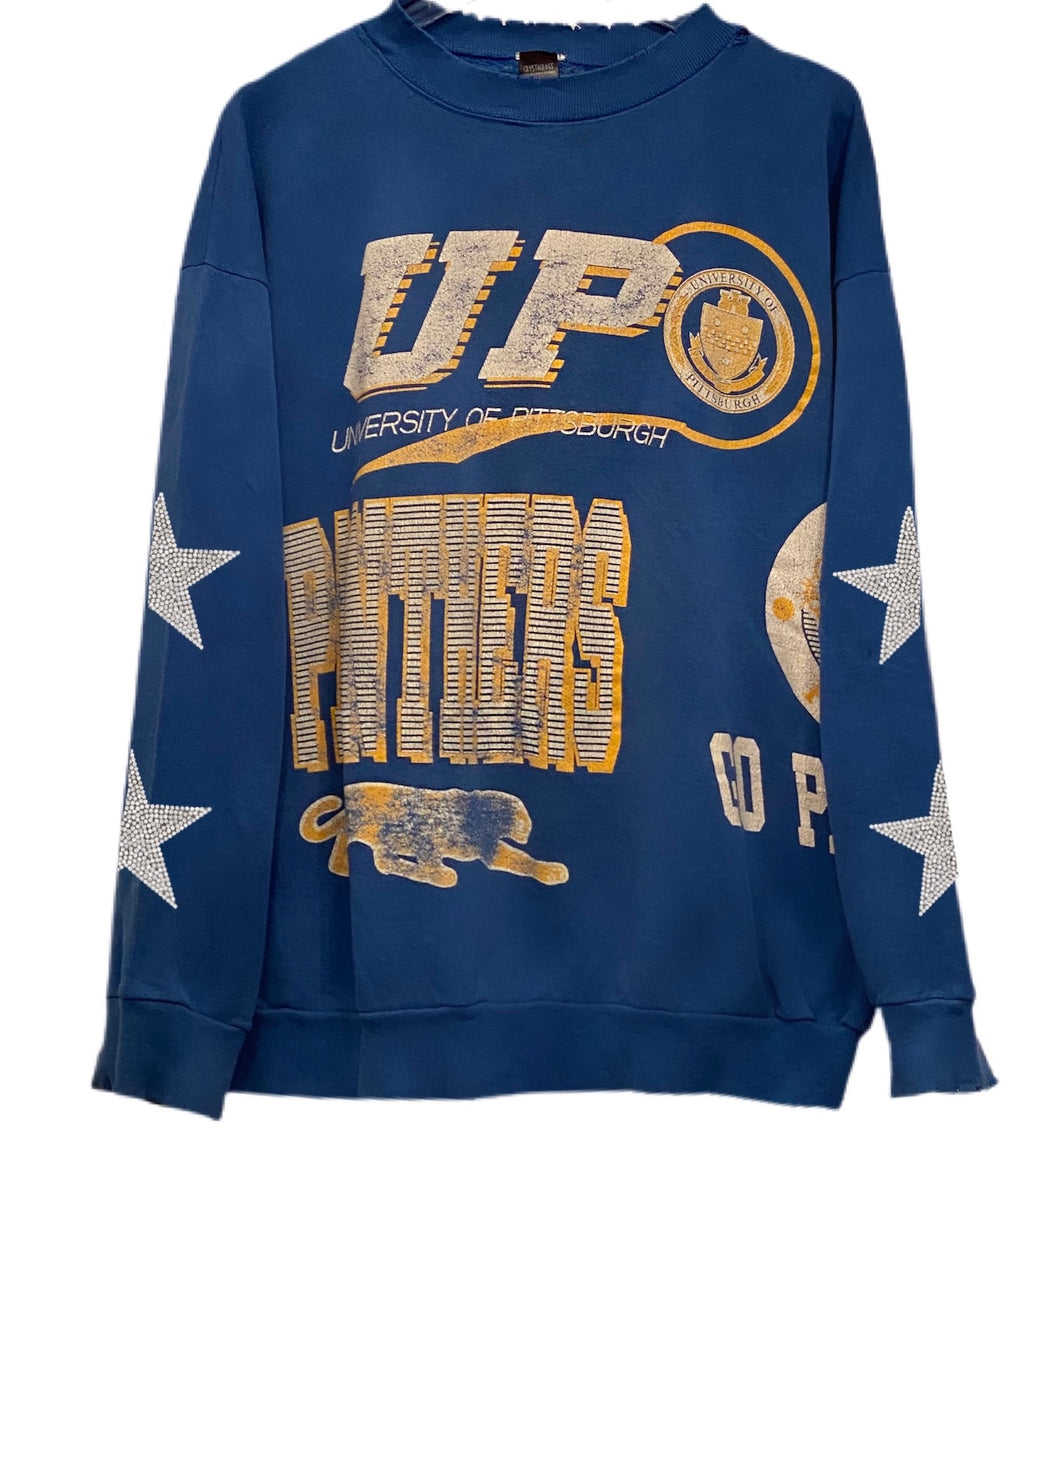 University of Pittsburgh, “Rare Find” One of a KIND Vintage Sweatshirt with Crystal Star Design